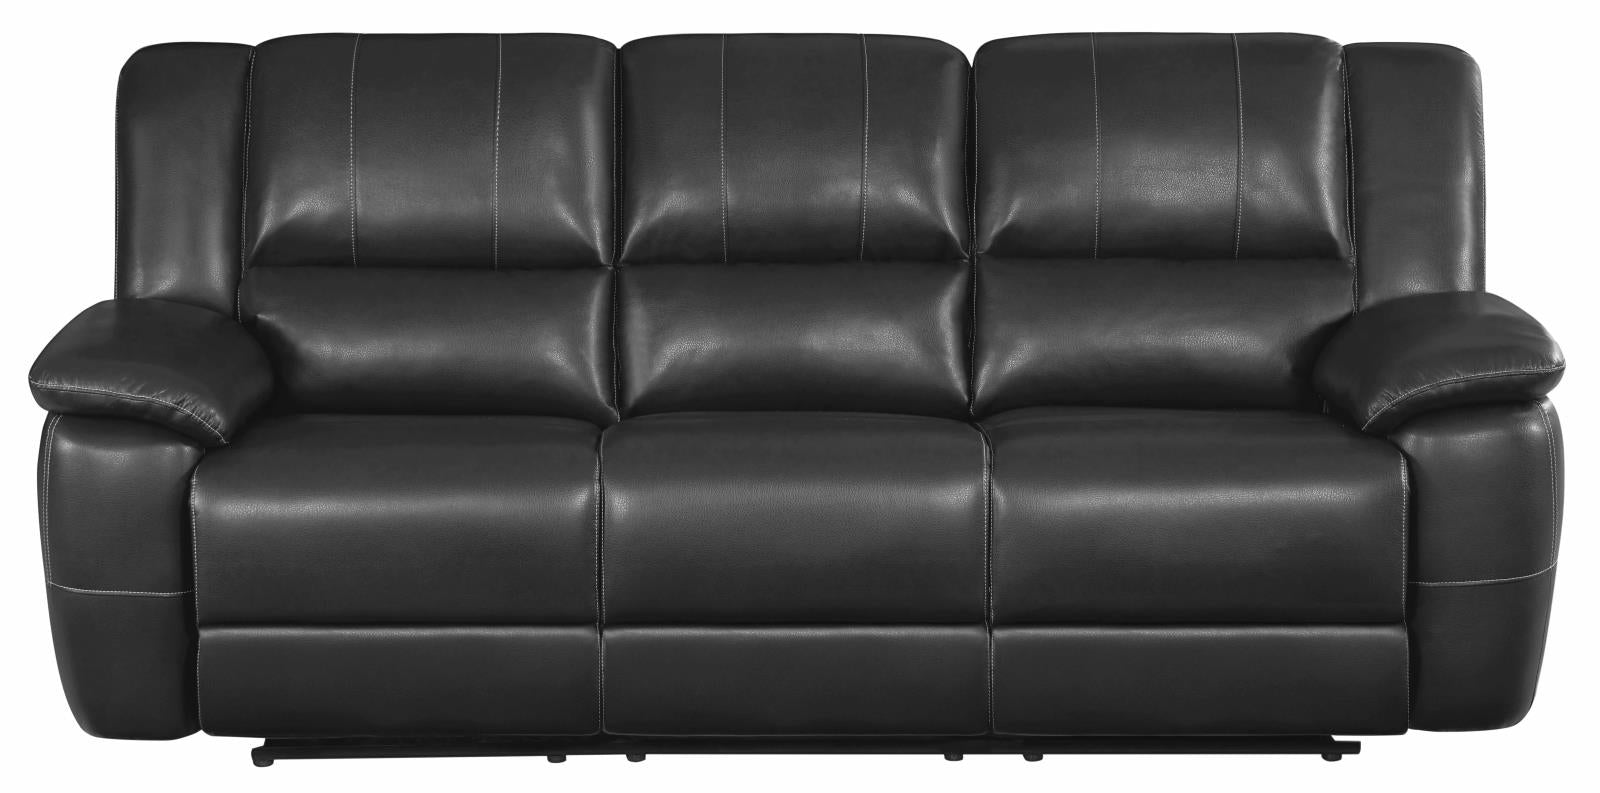 Lee Upholstered Pillow Top Arm Living Room Set Black - What A Room